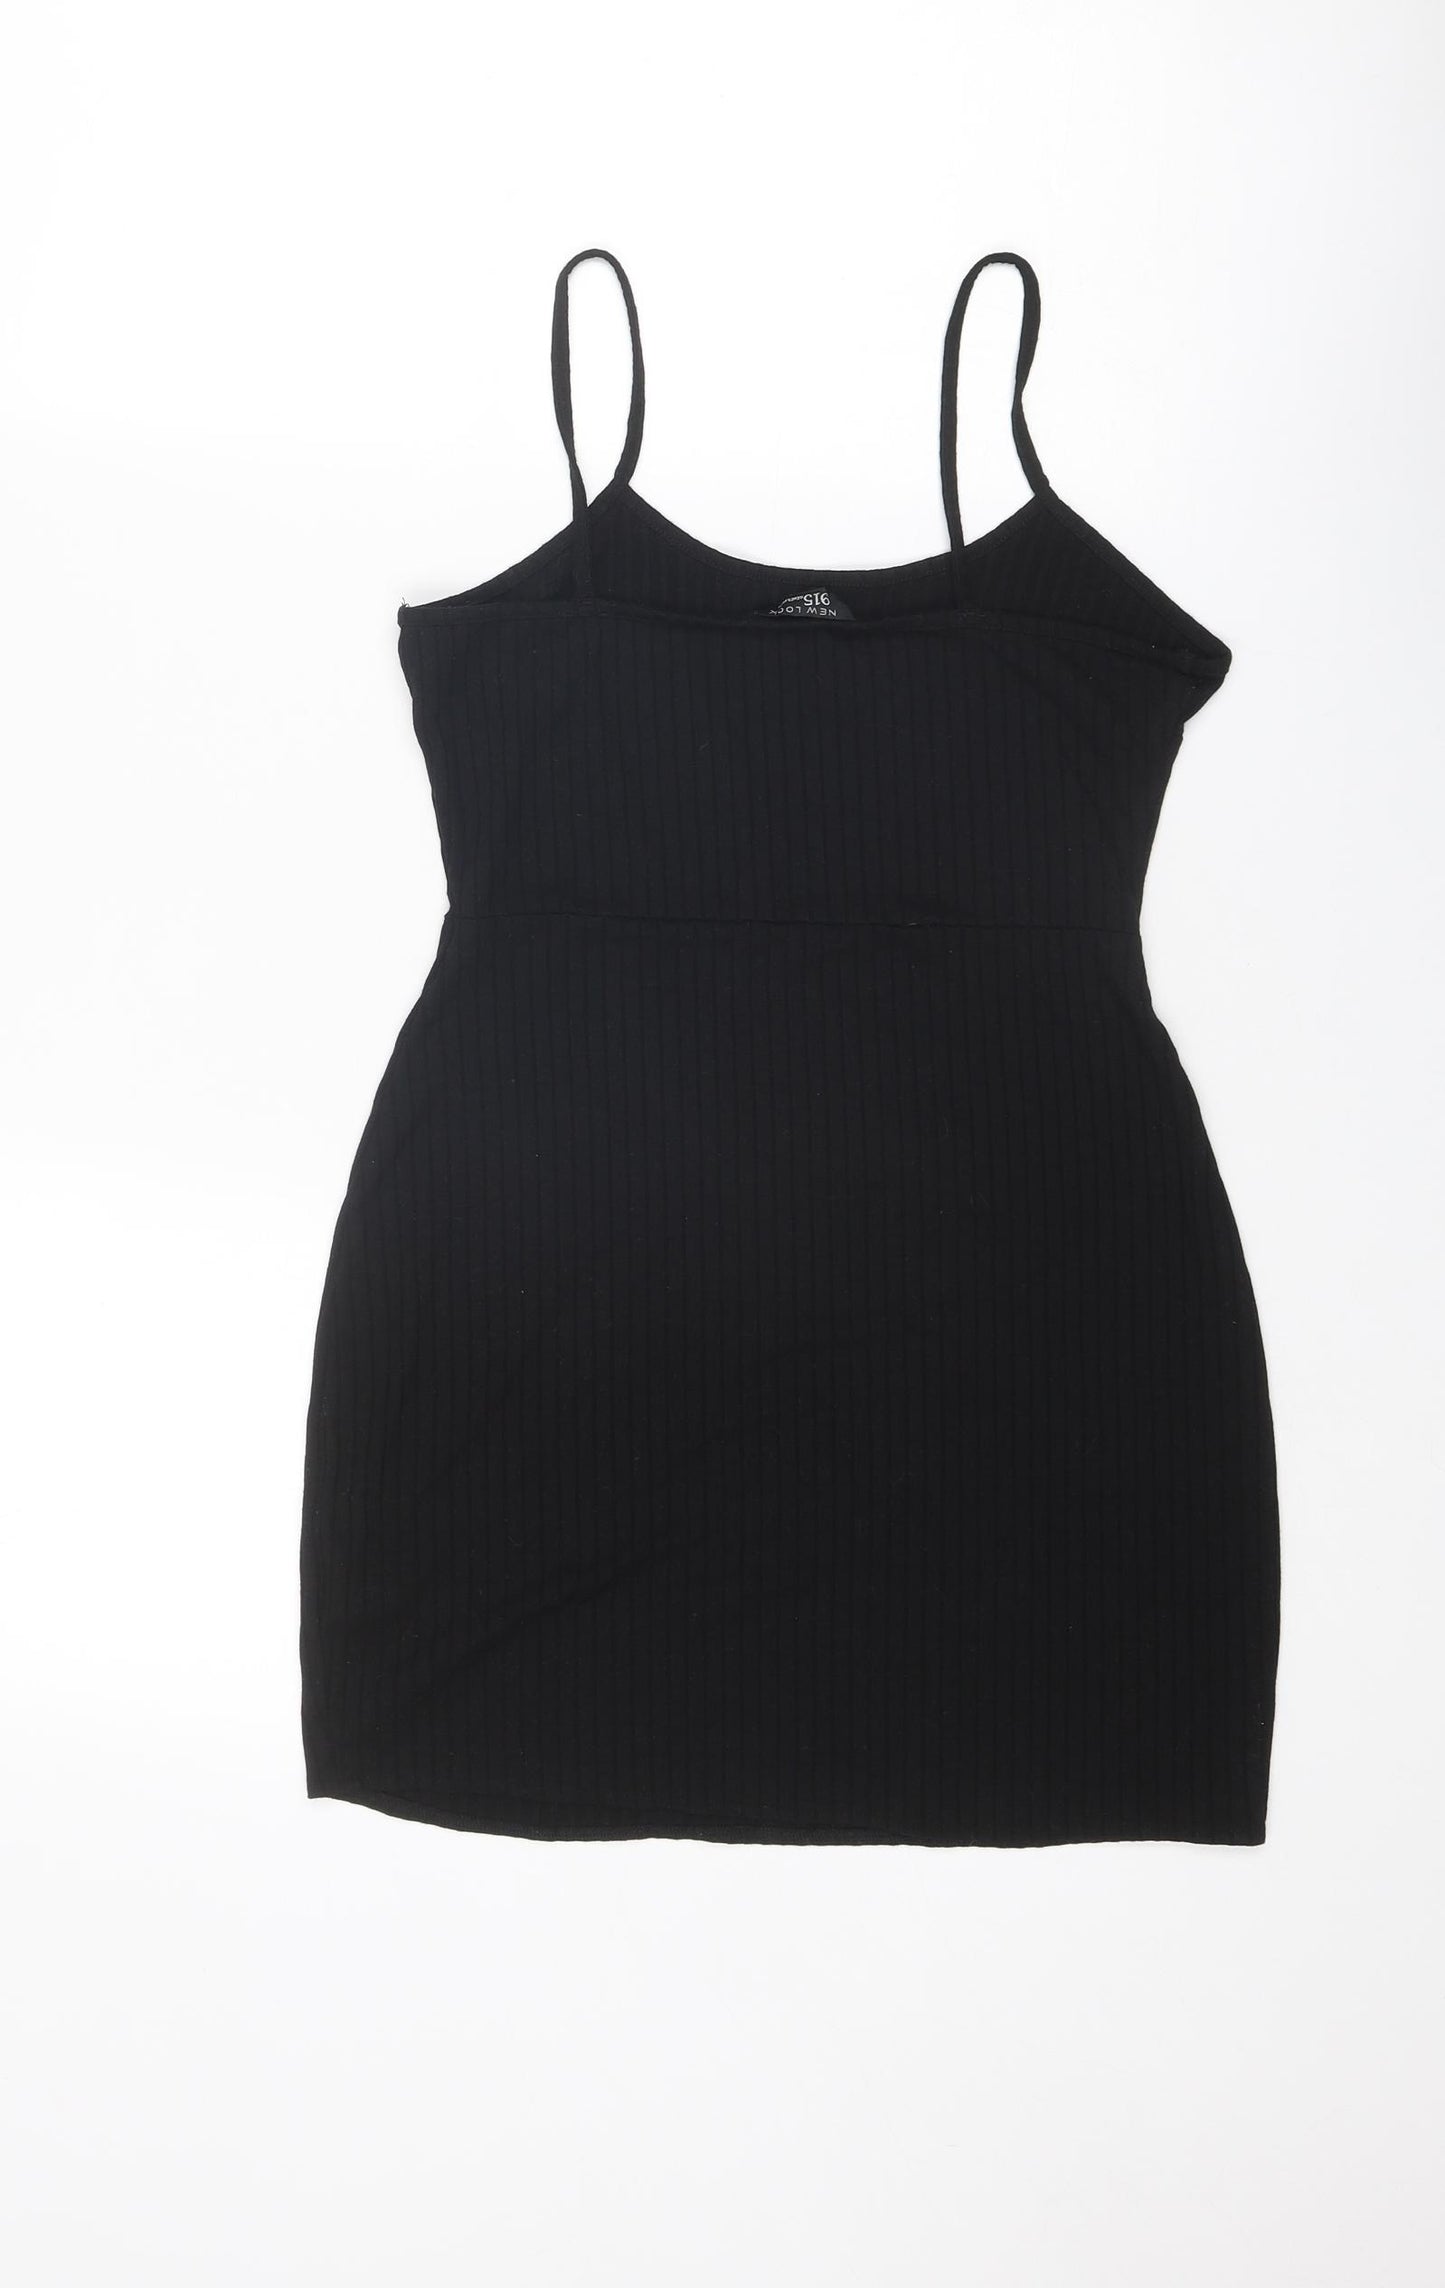 New Look Girls Black Polyester Tank Dress Size 12-13 Years Scoop Neck Pullover